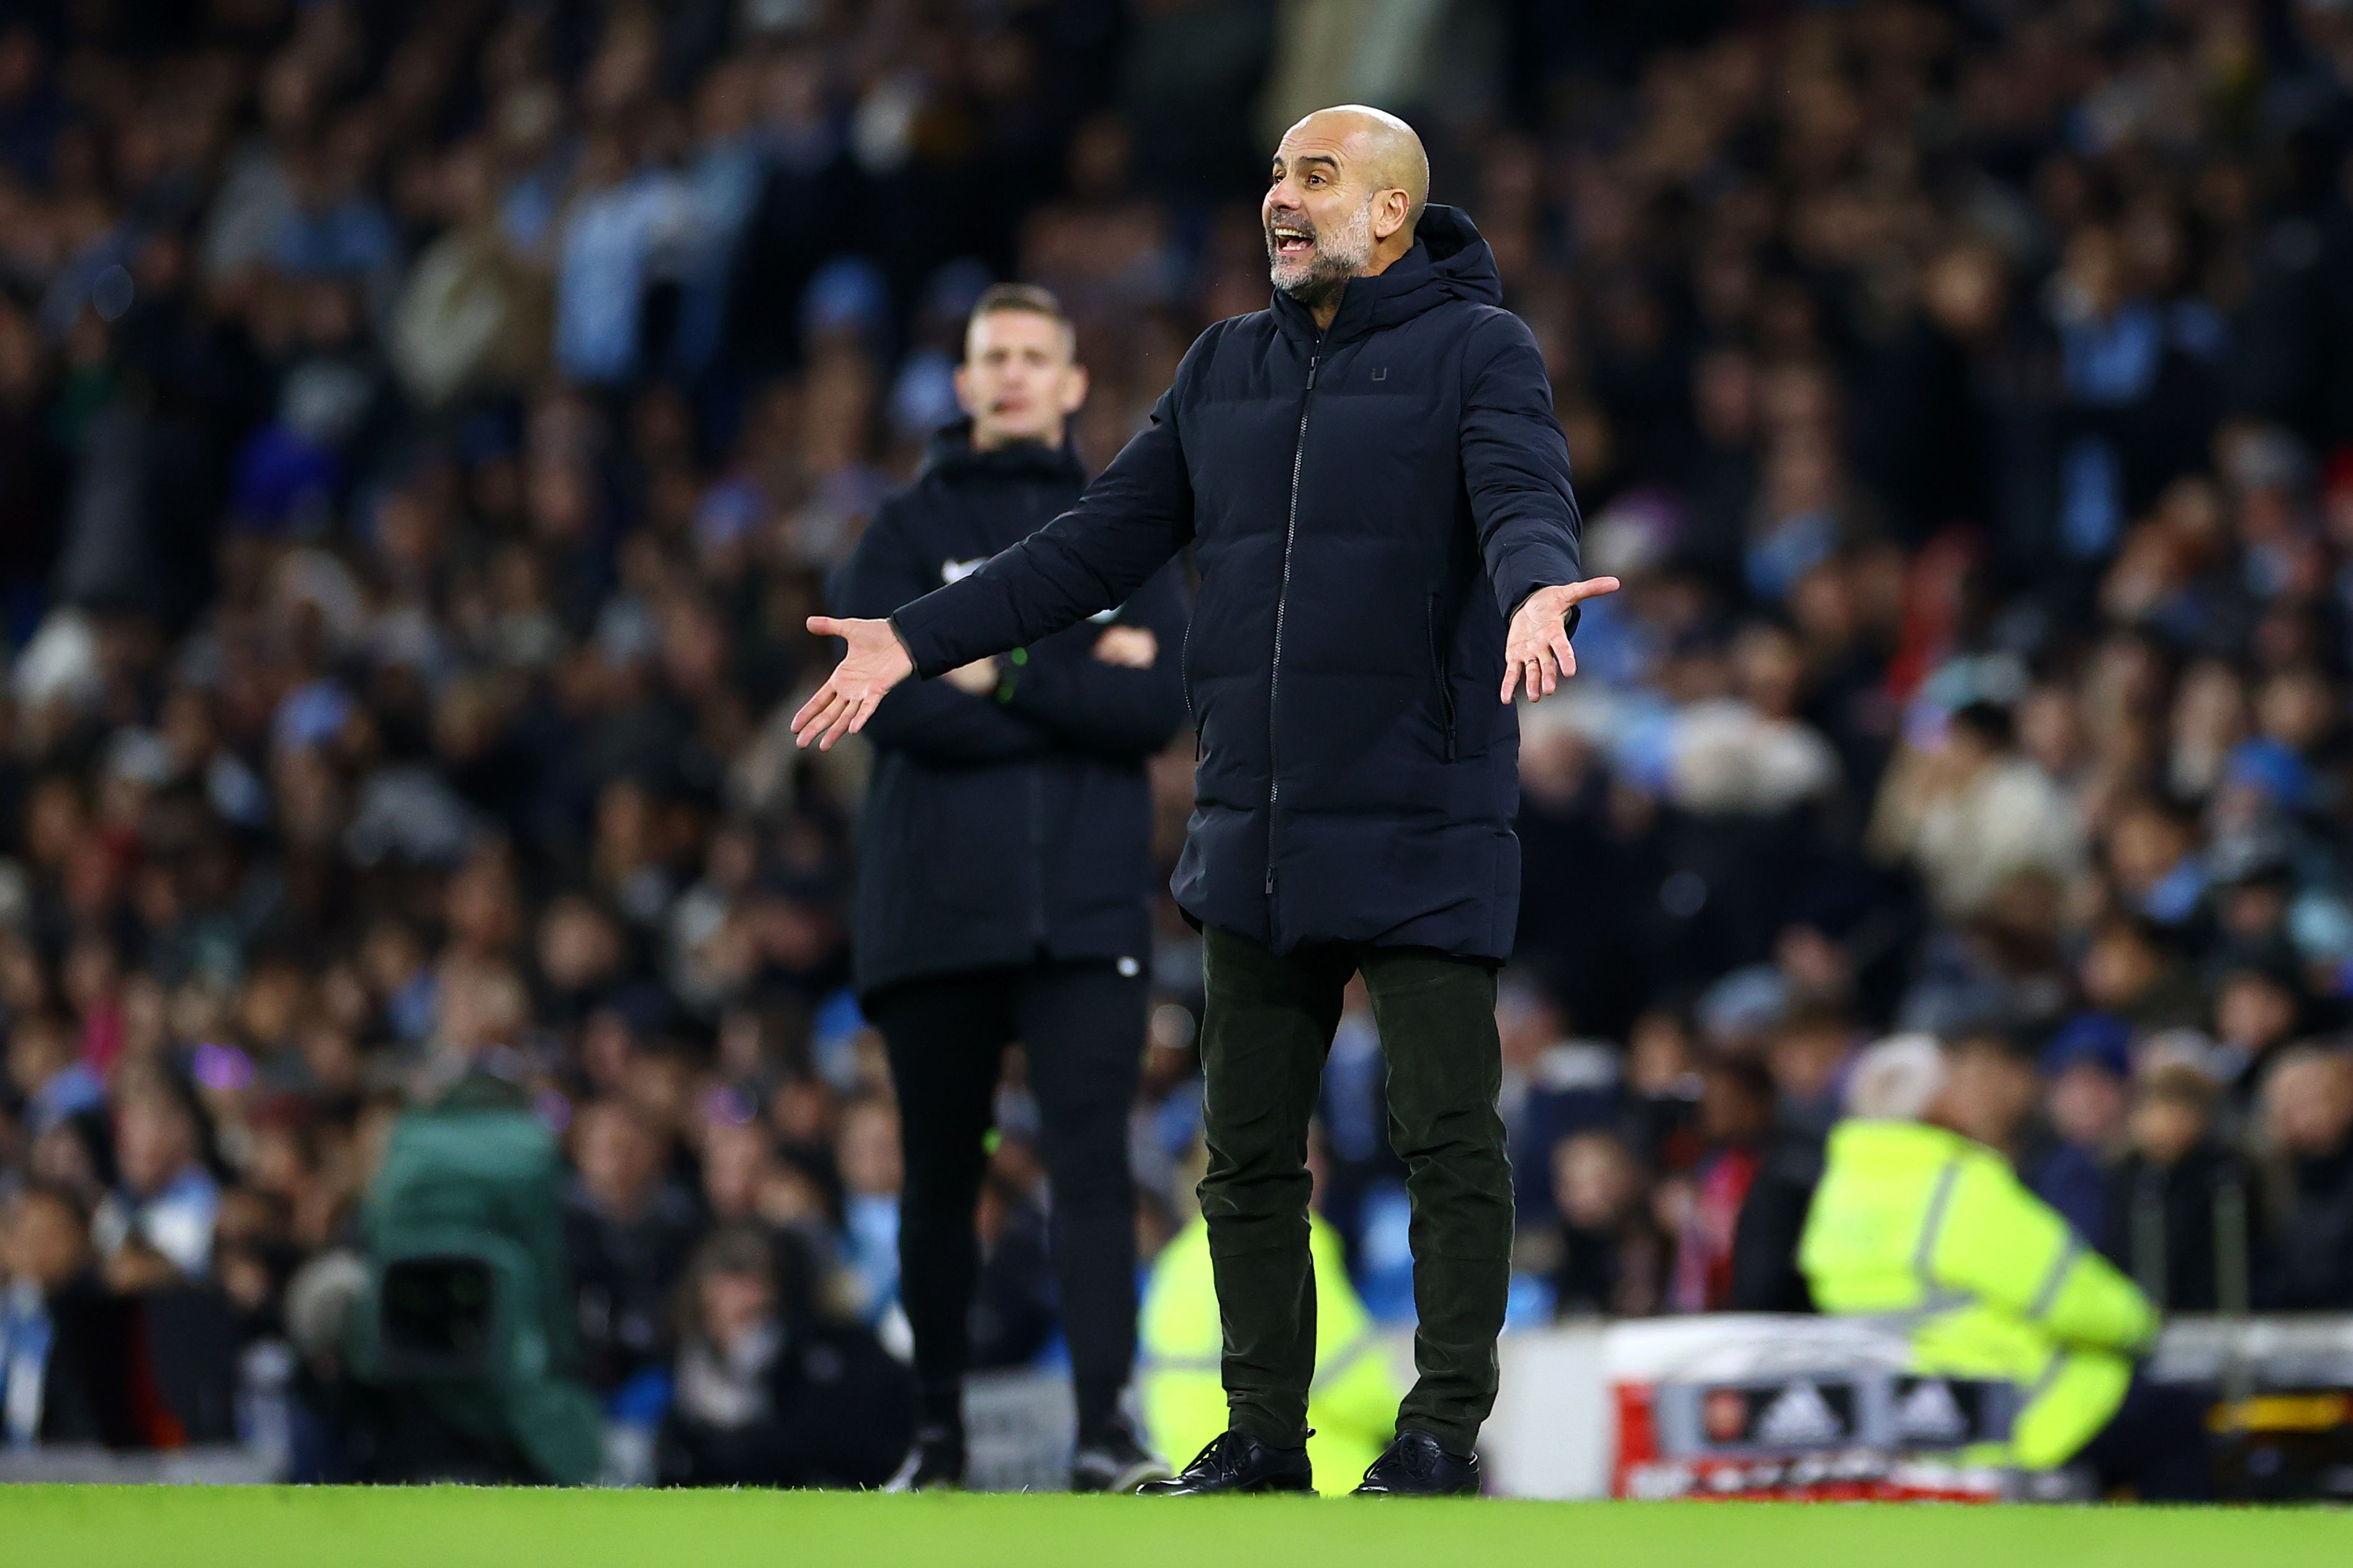 Pep Guardiola of Manchester City gestures from the touchline